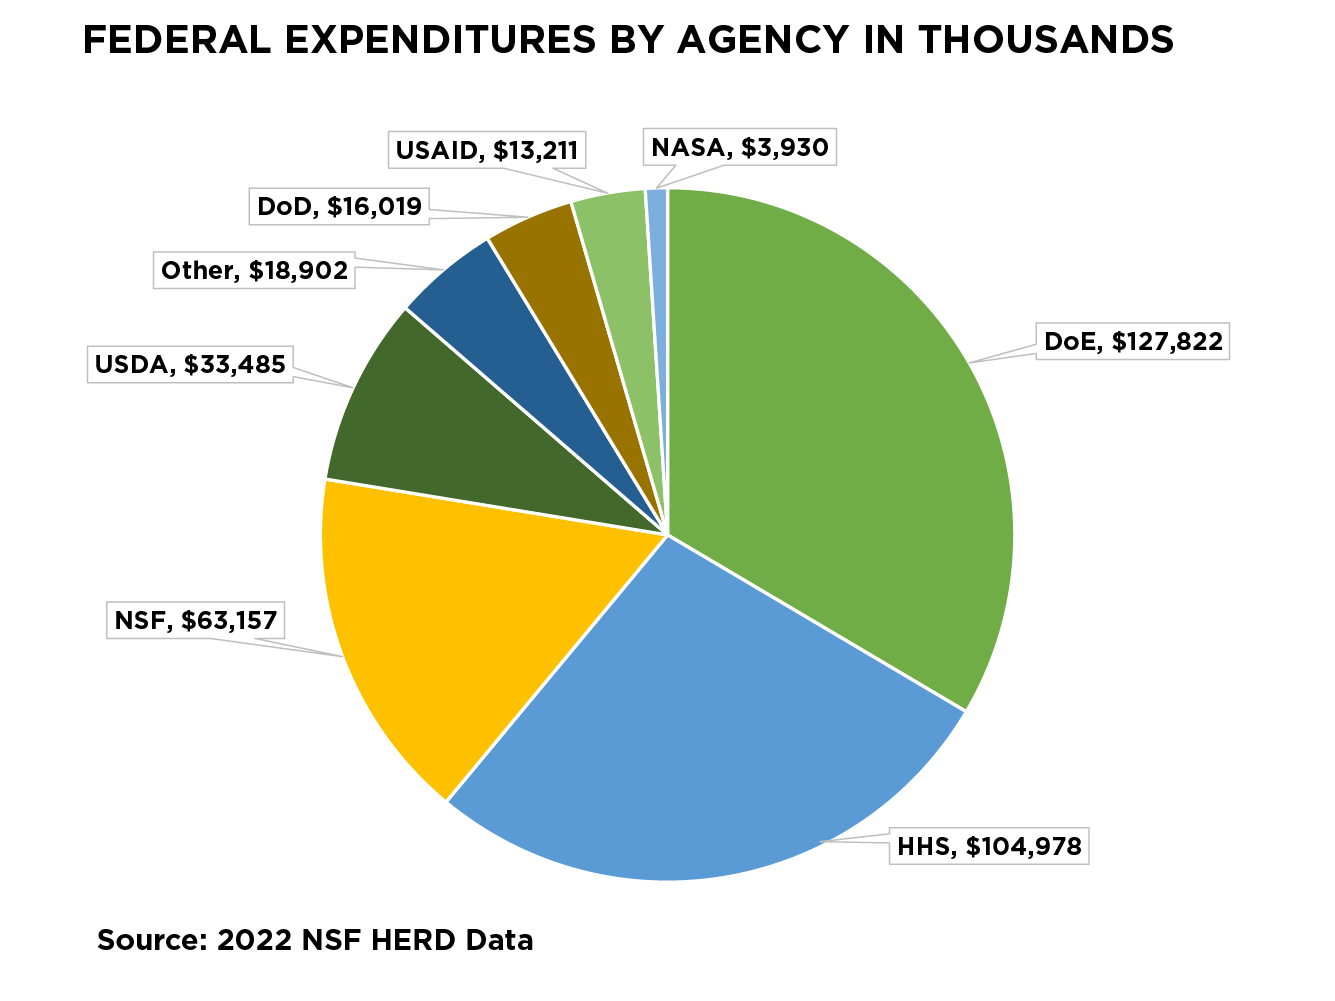 Pie graph indicating breakout of expenditures by federal agency